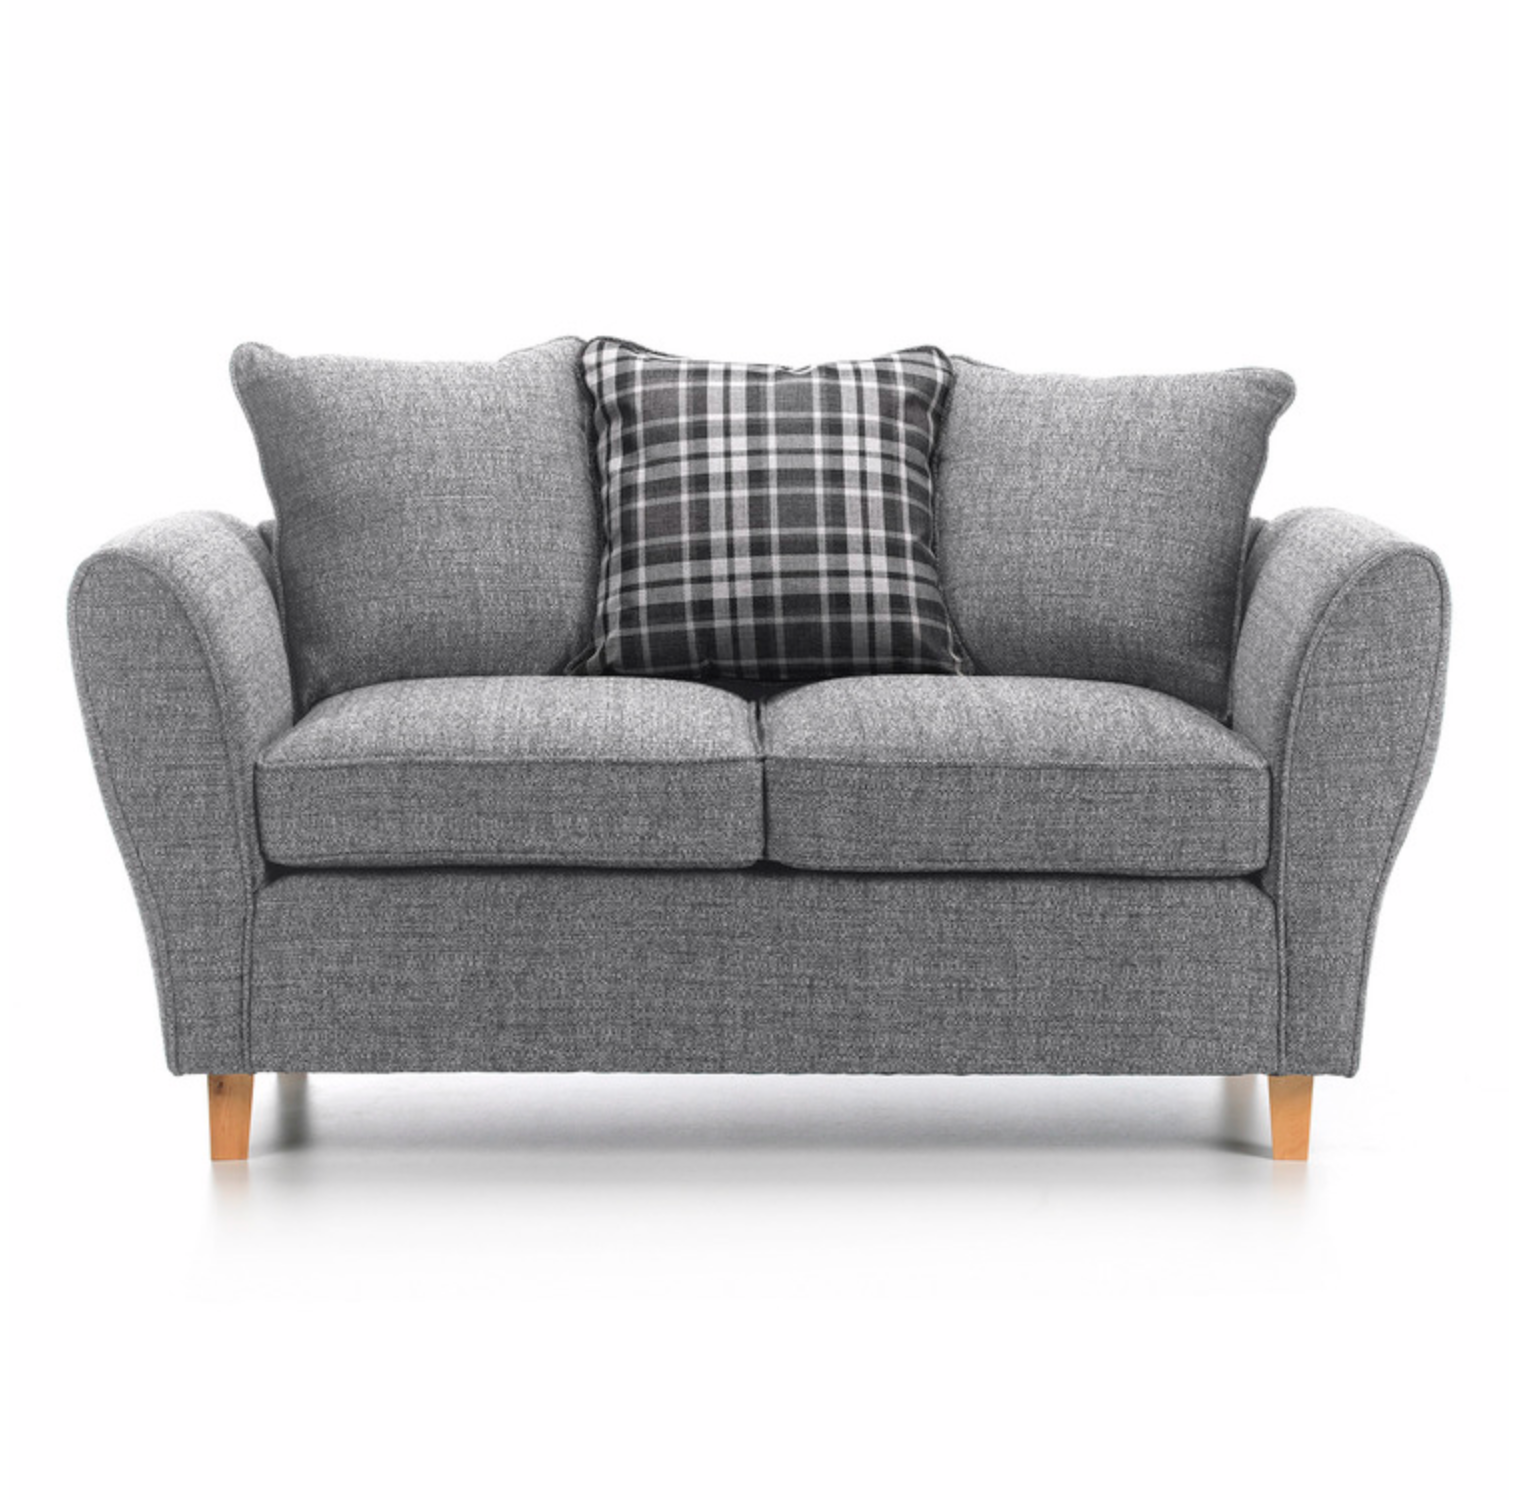 Chilton 2 Seater Sofa Scatter Back Cushions Grey Check